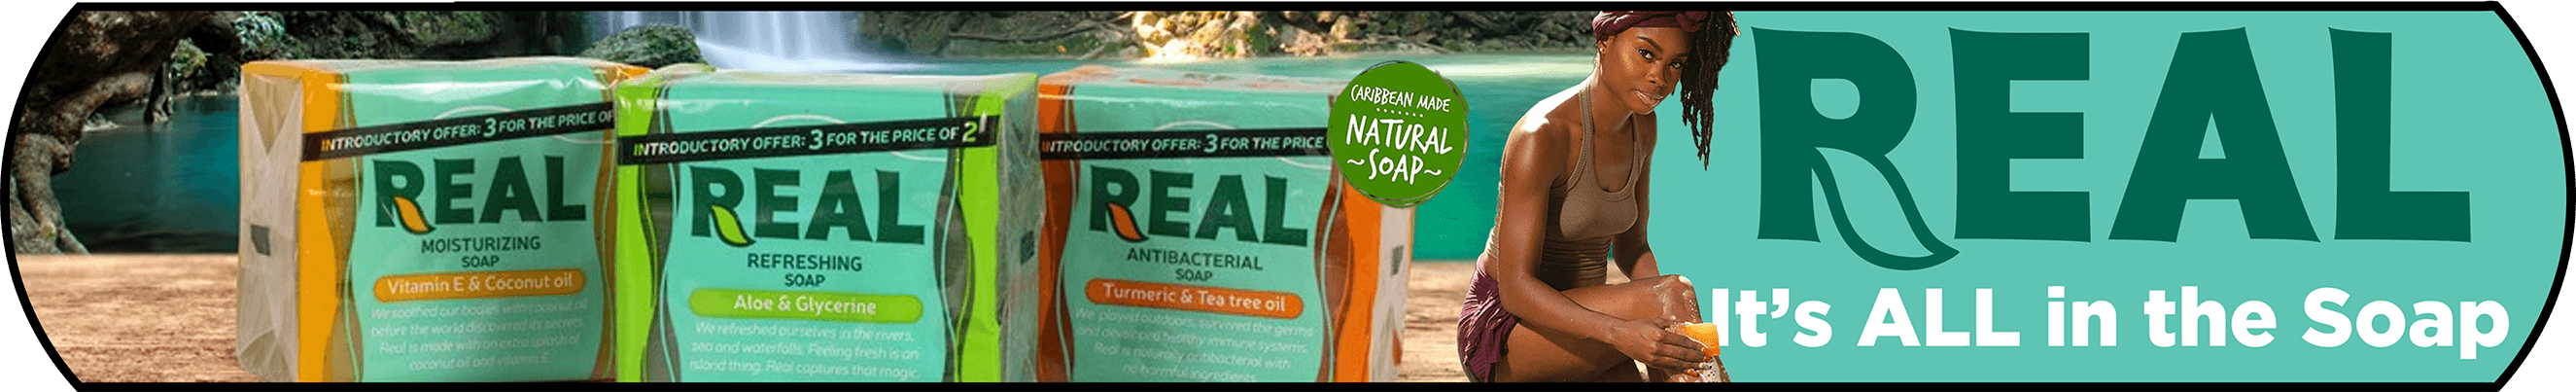 Real Soap Banner